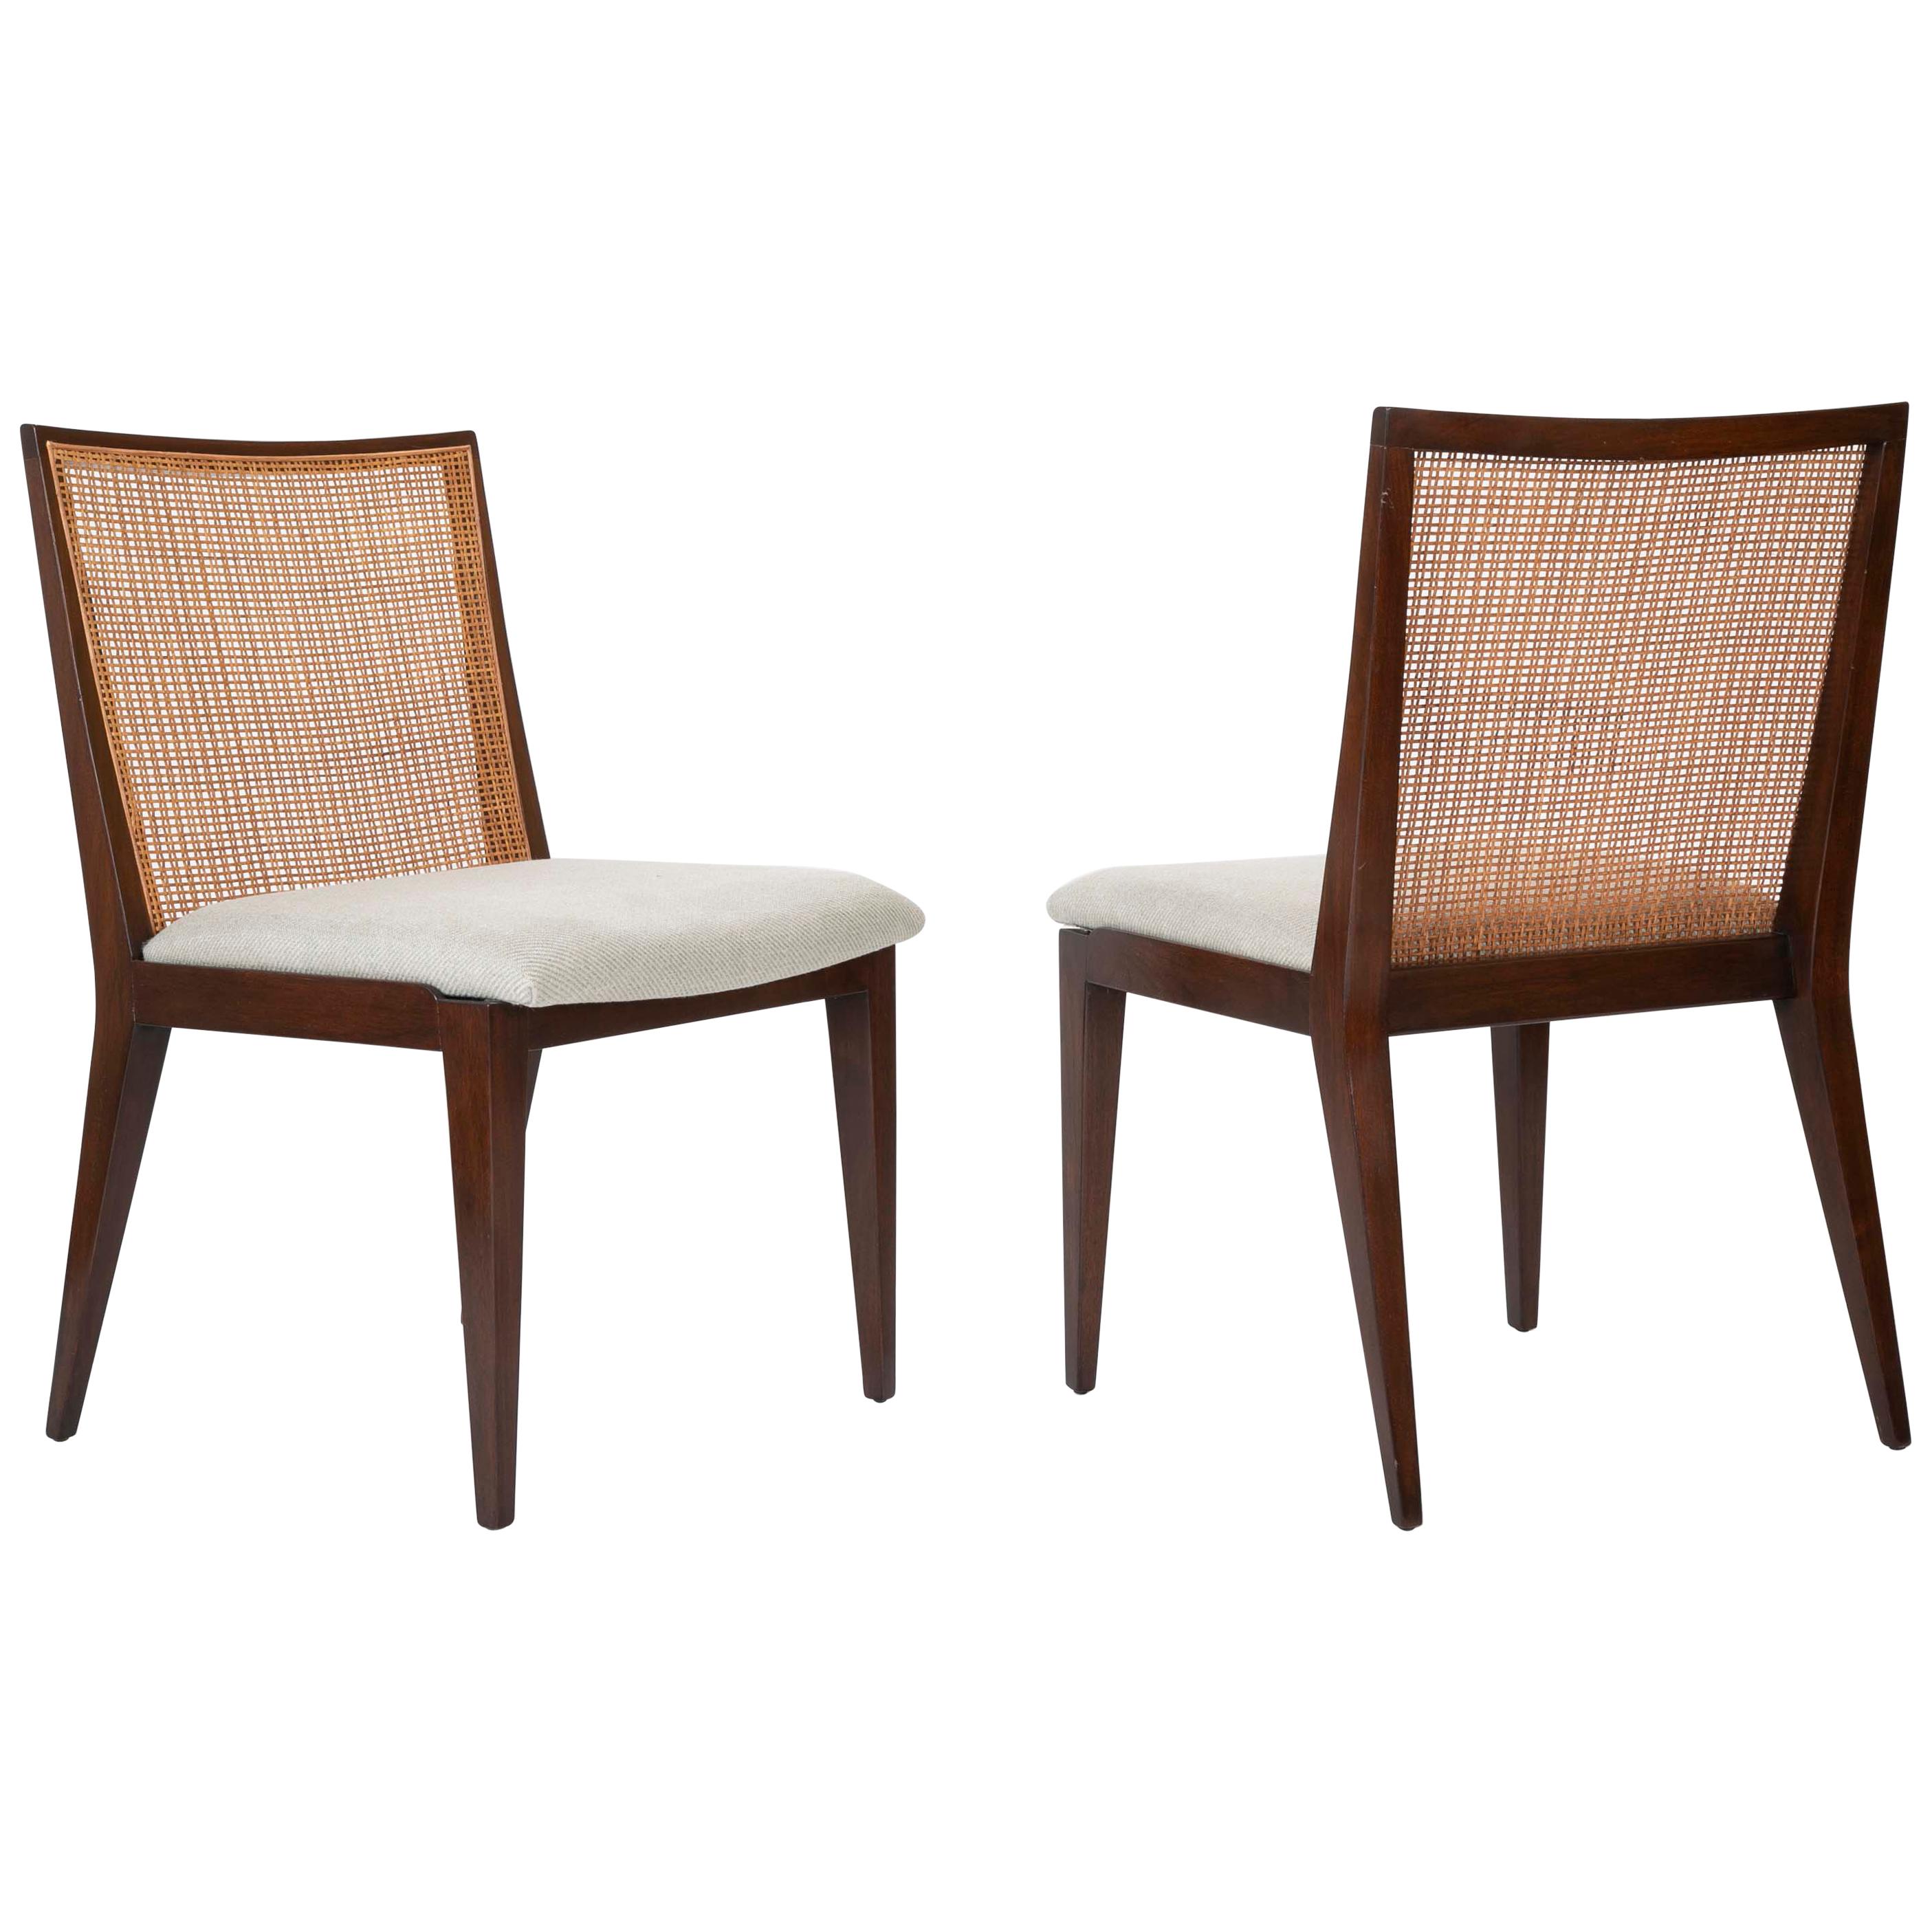 A Set of Six Walnut and Caned Dining Chair designed by Edward Wormley